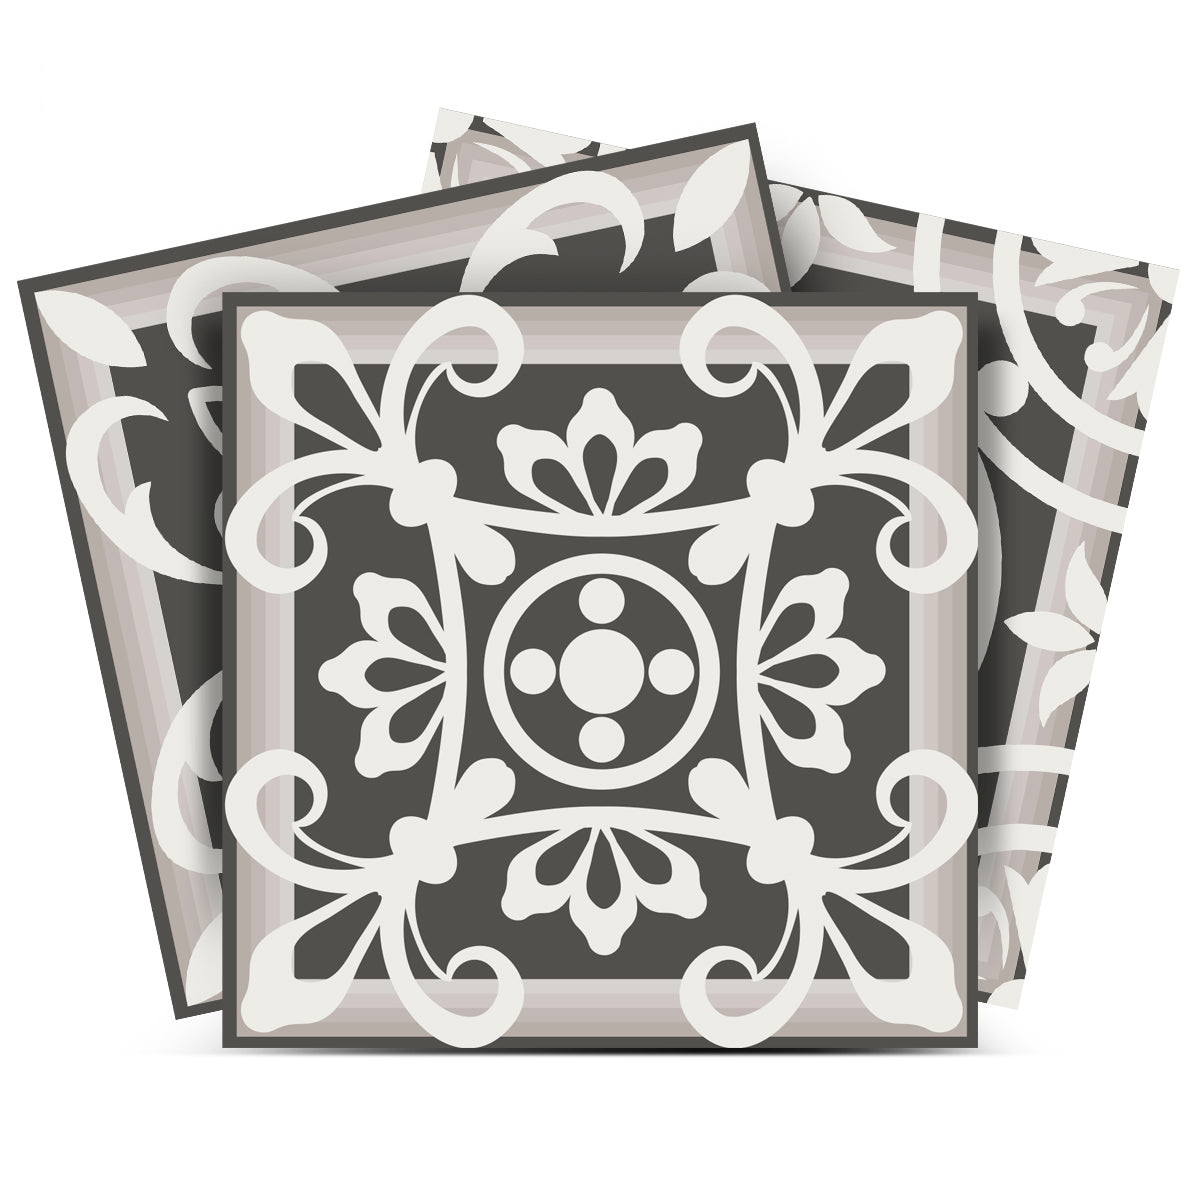 6" x 6" Wood Brown and White Mosaic Peel and Stick Removable Tiles-400481-1